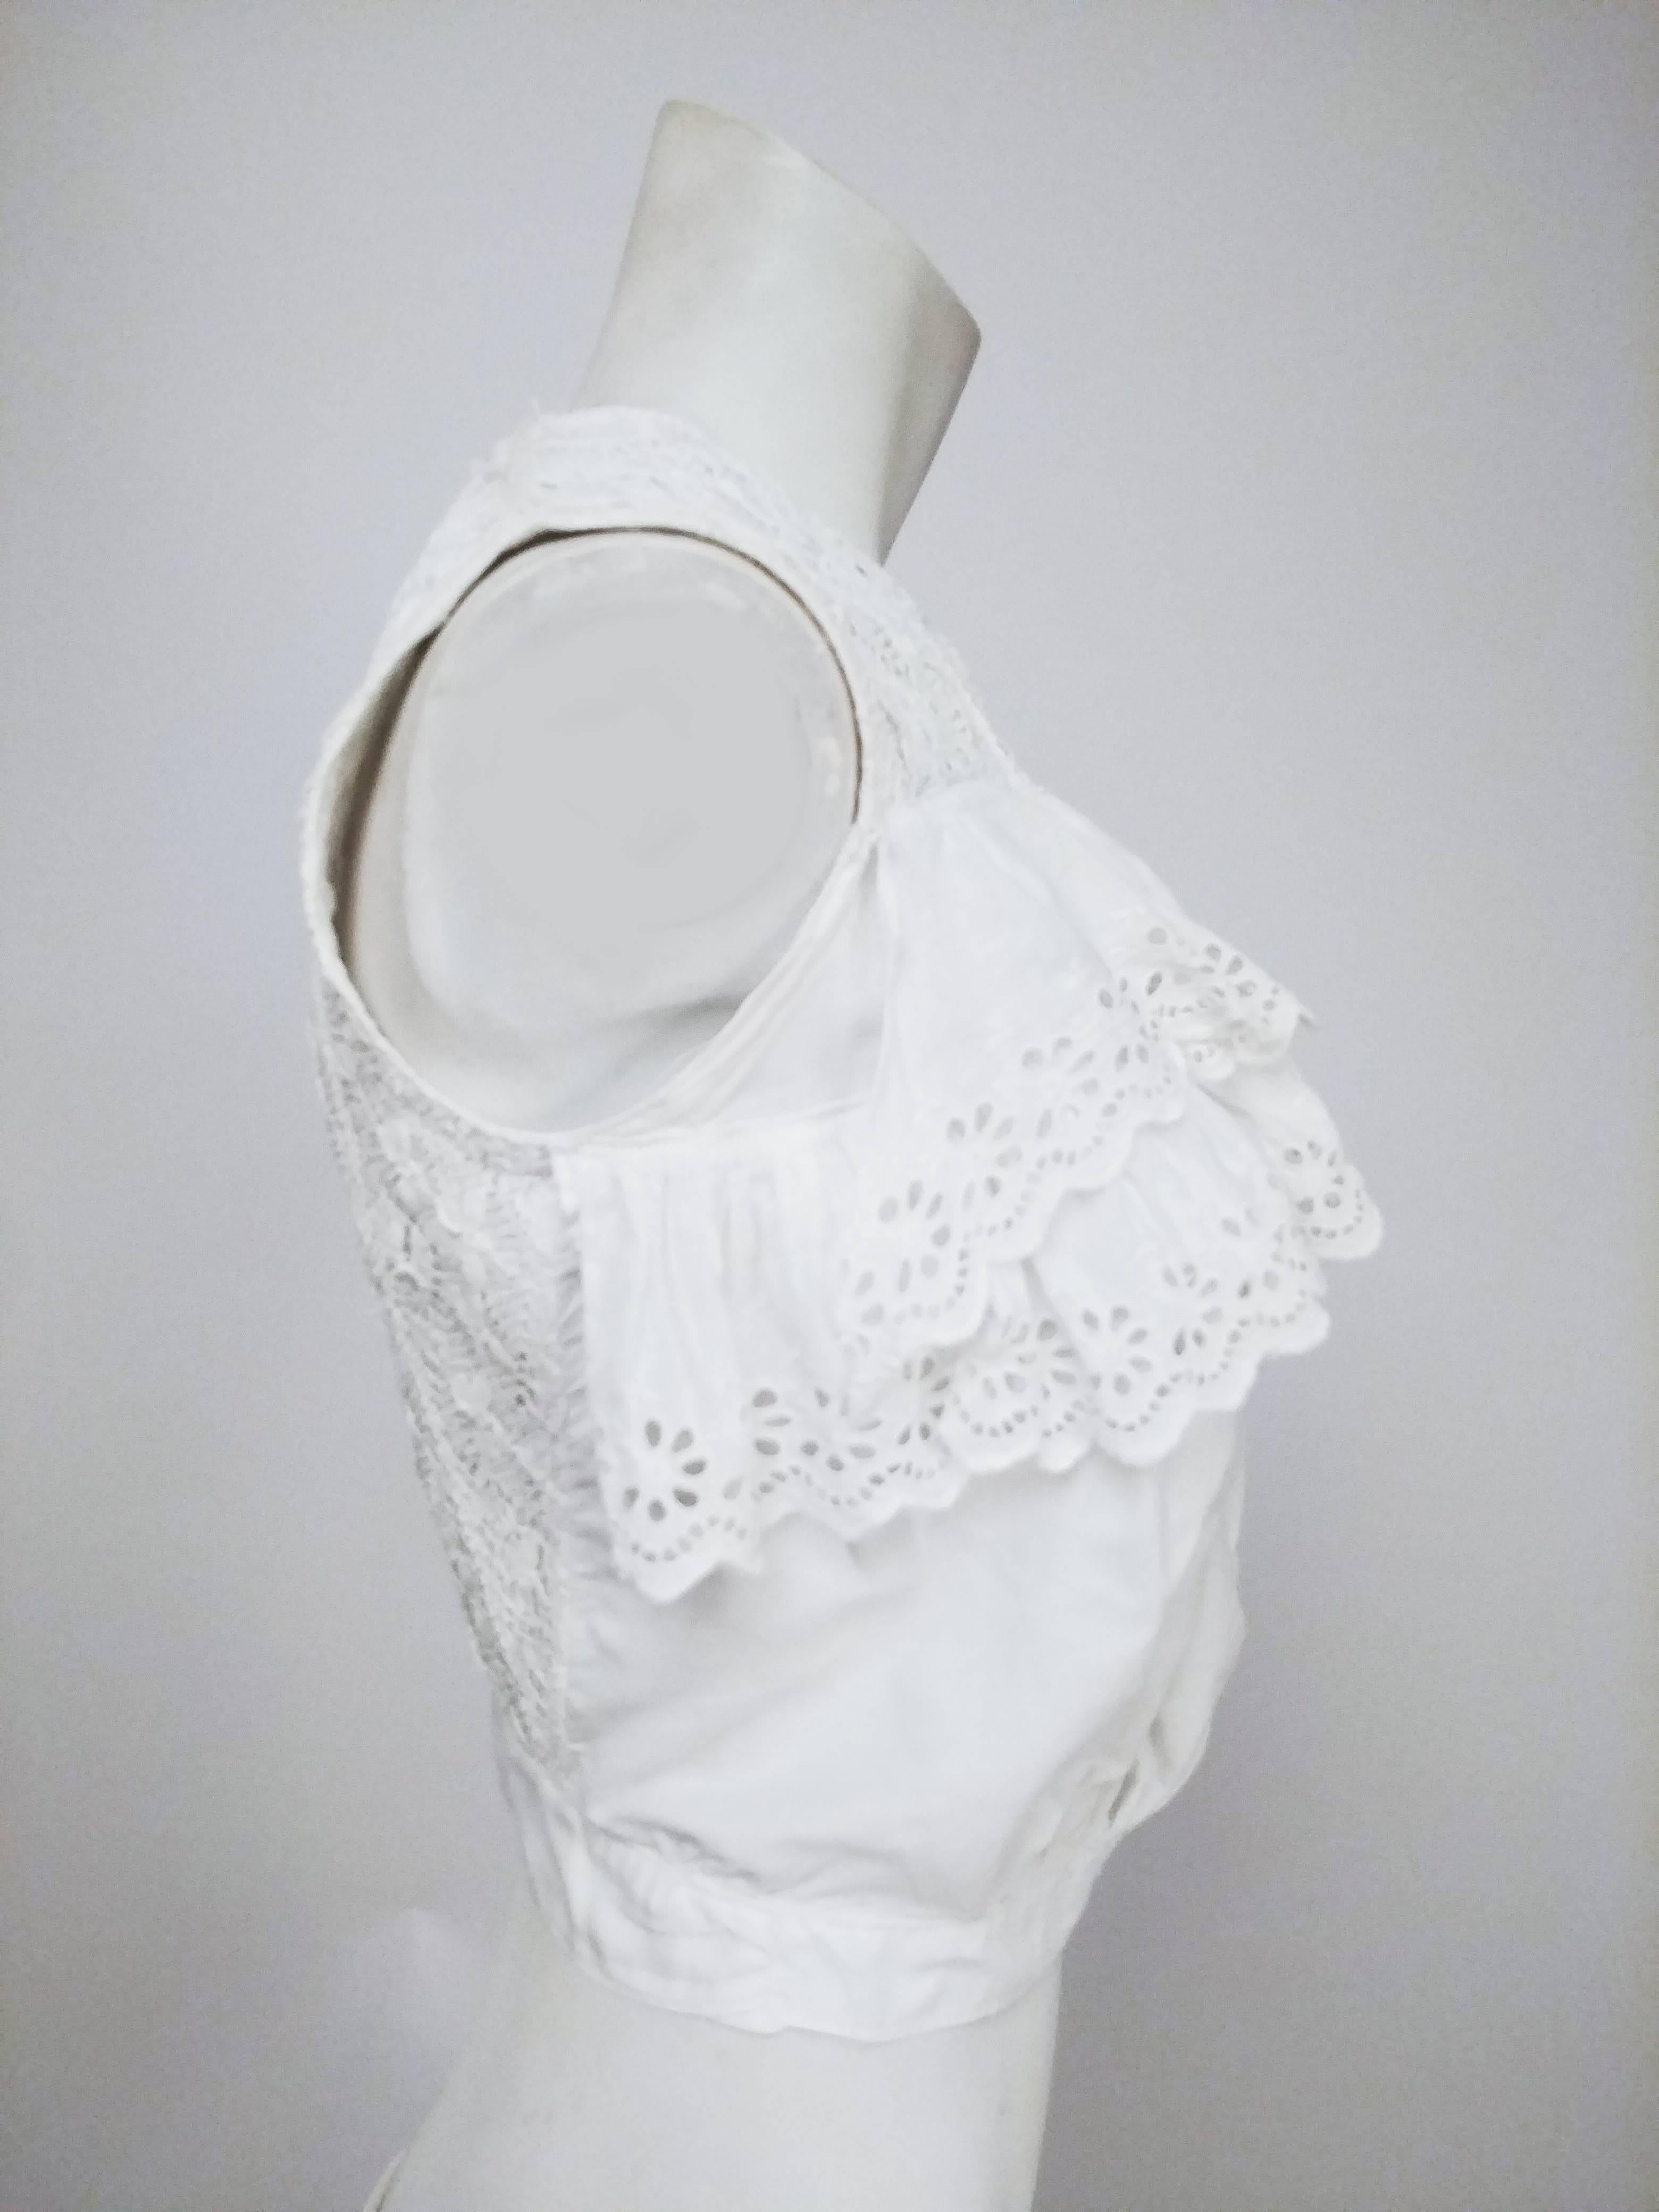 Edwardian White Eyelet Lace Ruffled Top. White cropped under-blouse garment ruffled eyelet lace at bust. Buttons down front. Lace-covered back. Quilted lining. 